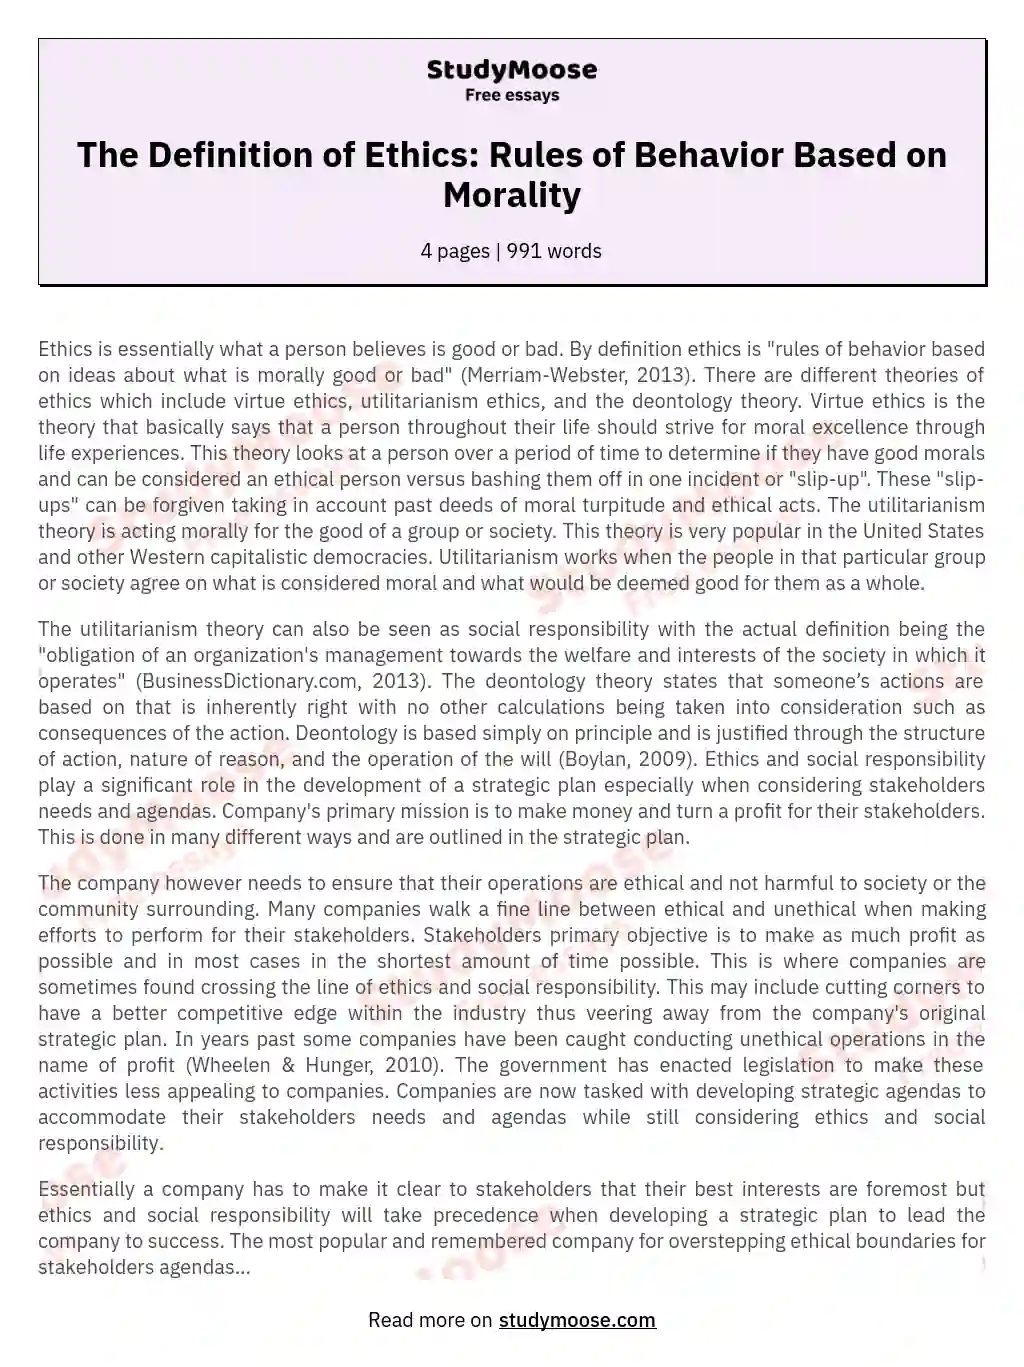 The Definition of Ethics: Rules of Behavior Based on Morality essay